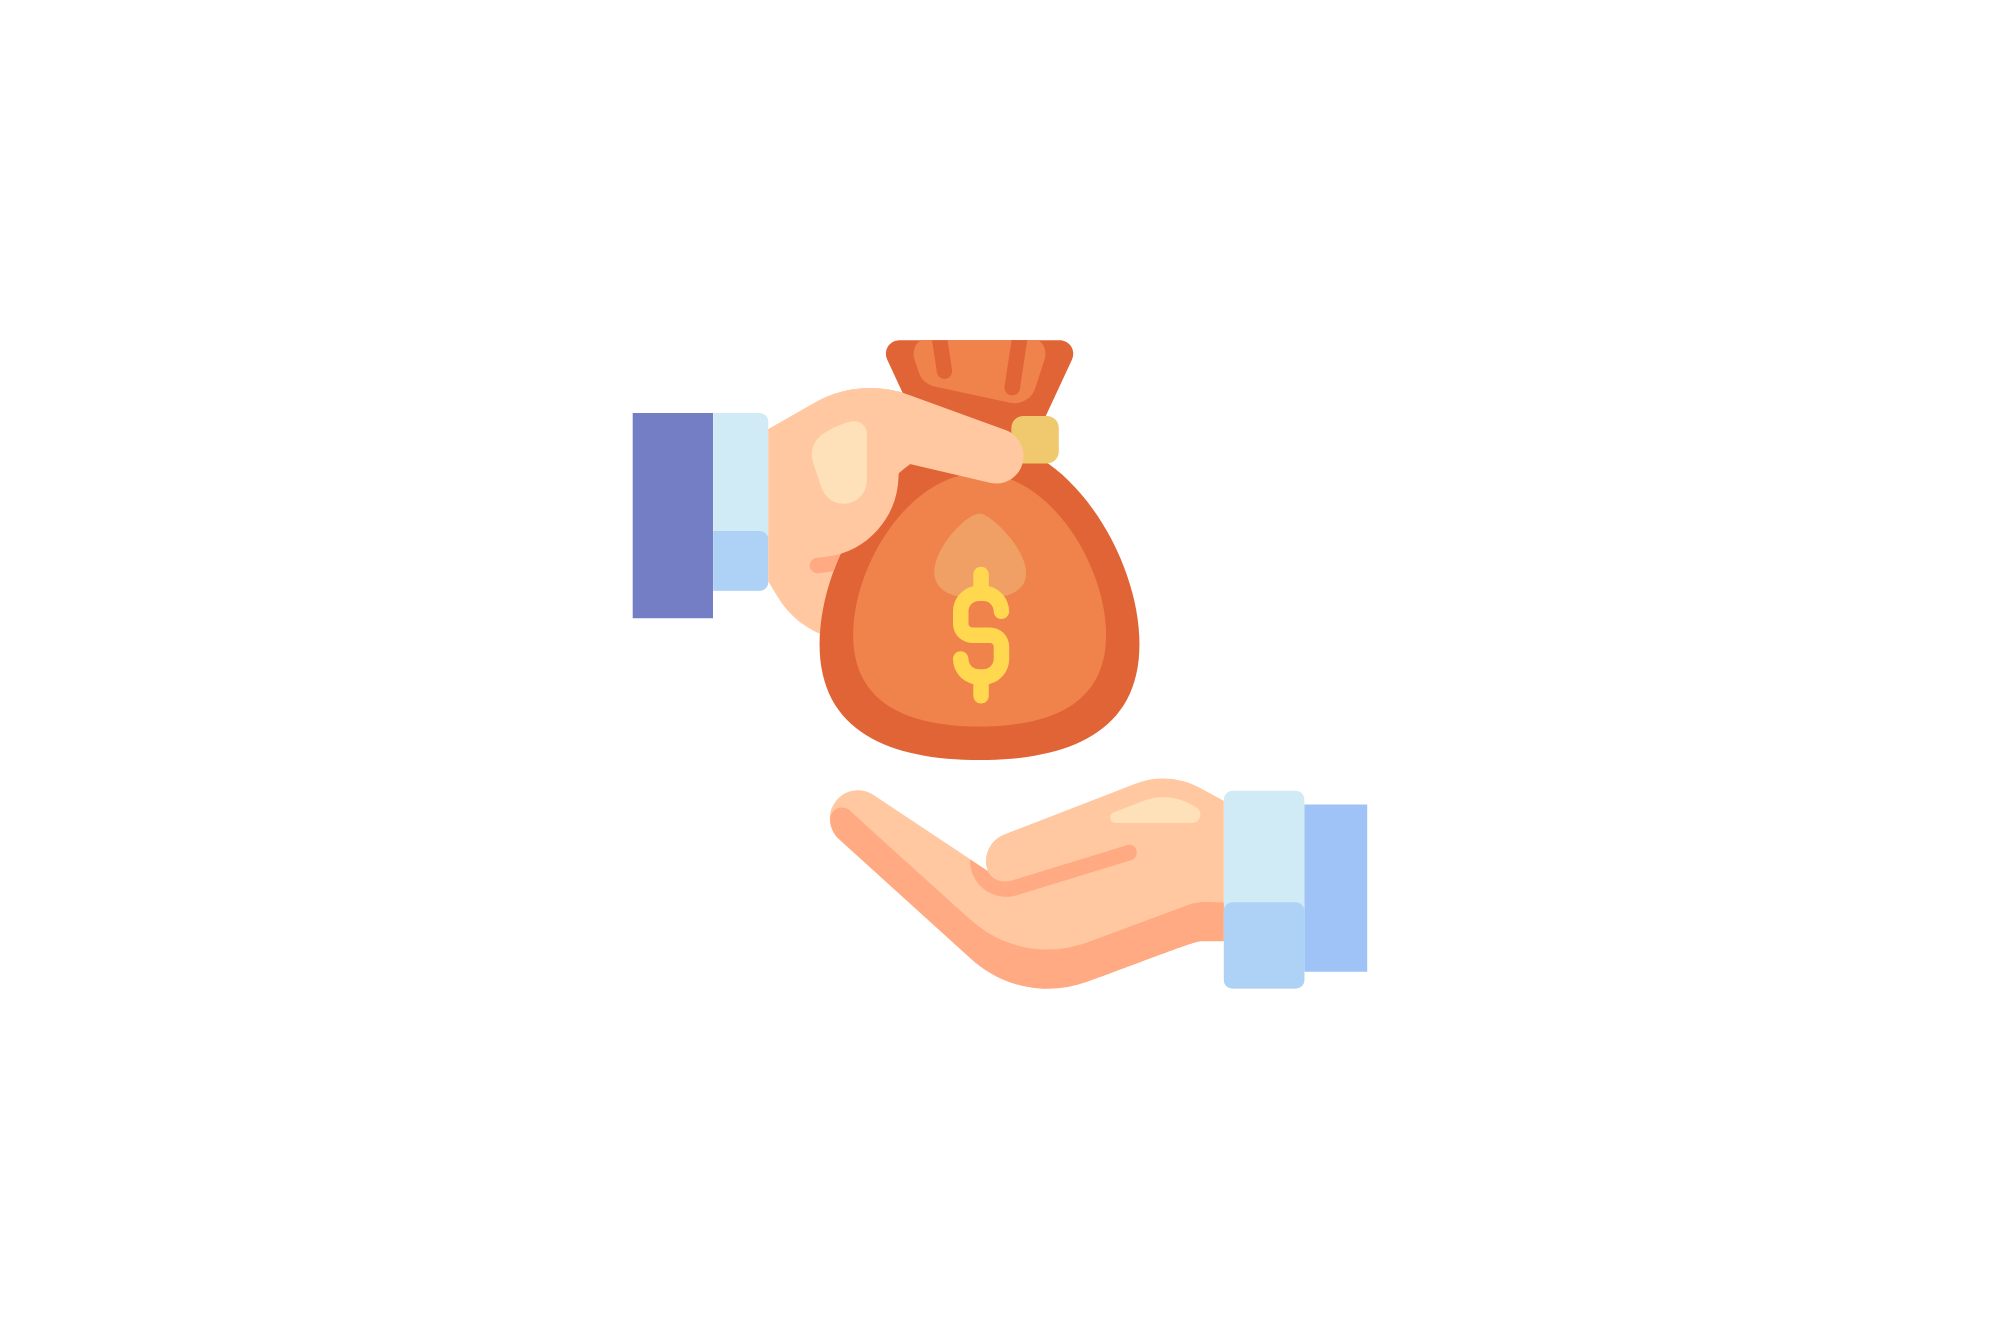 cloud with two hands exchanging money to represent small business loan requirements approved